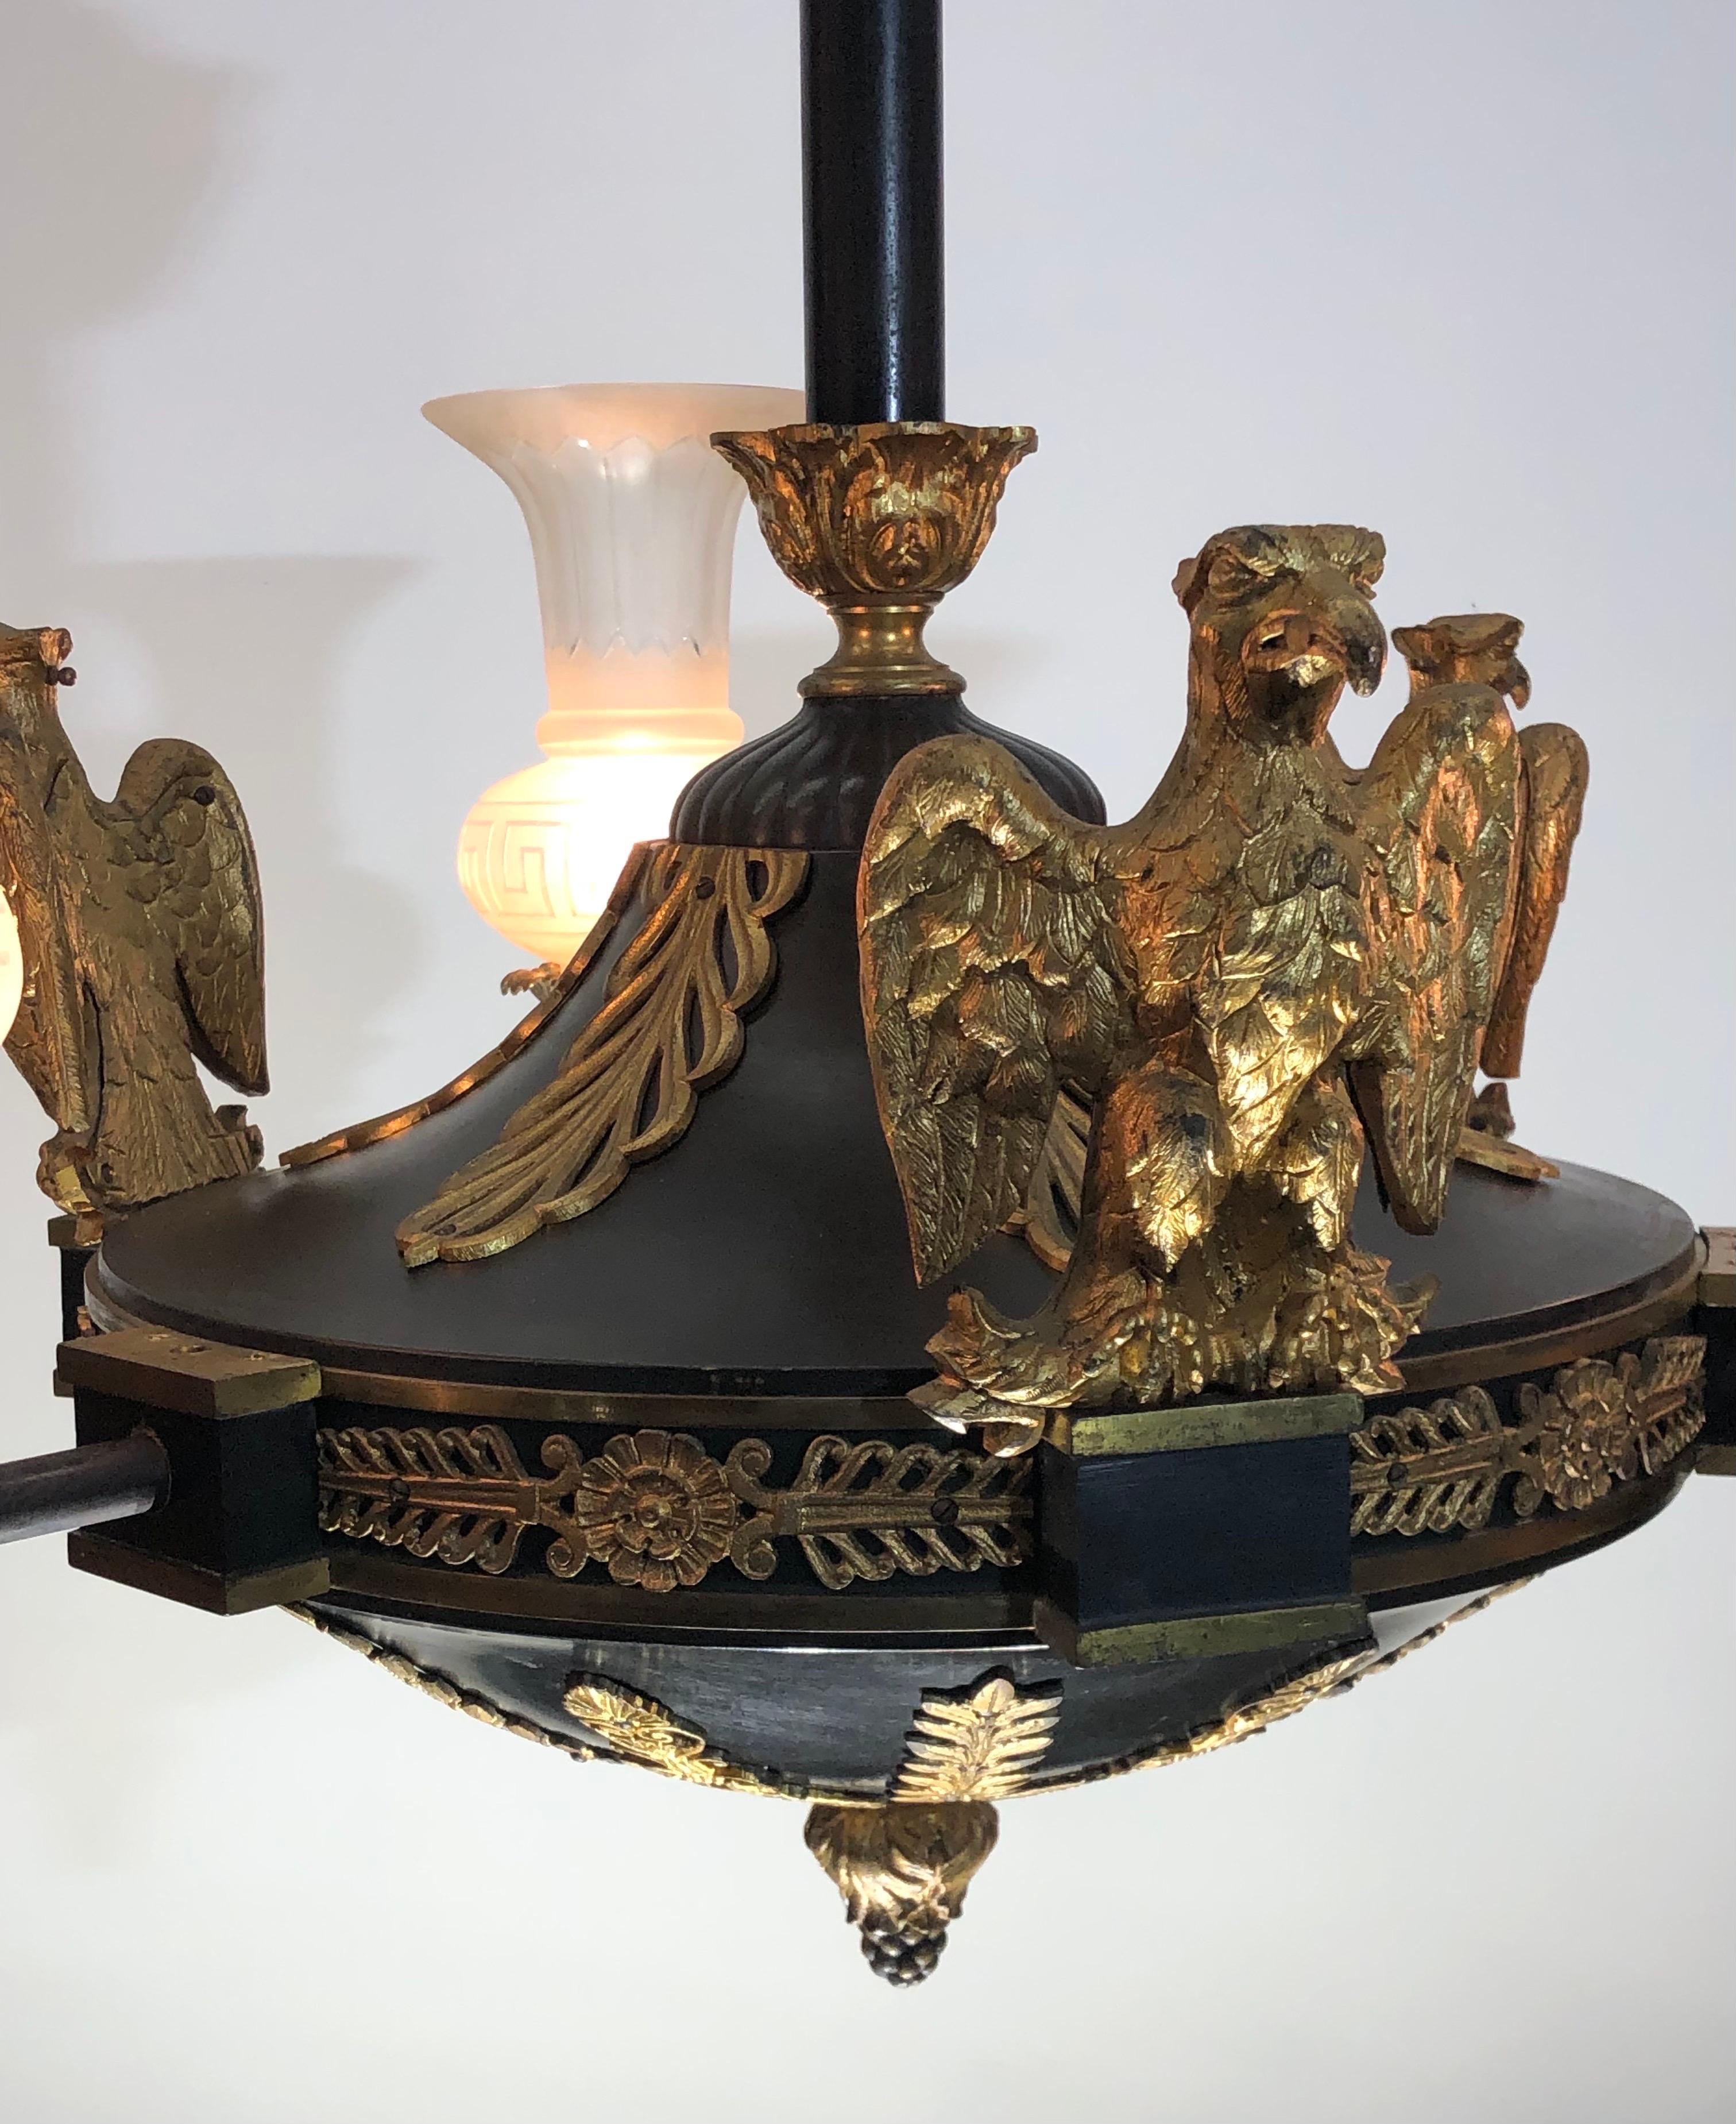  Medusa Rondanini and Eagle Mounted French Empire Bronze Gasolier / Chandelier For Sale 3